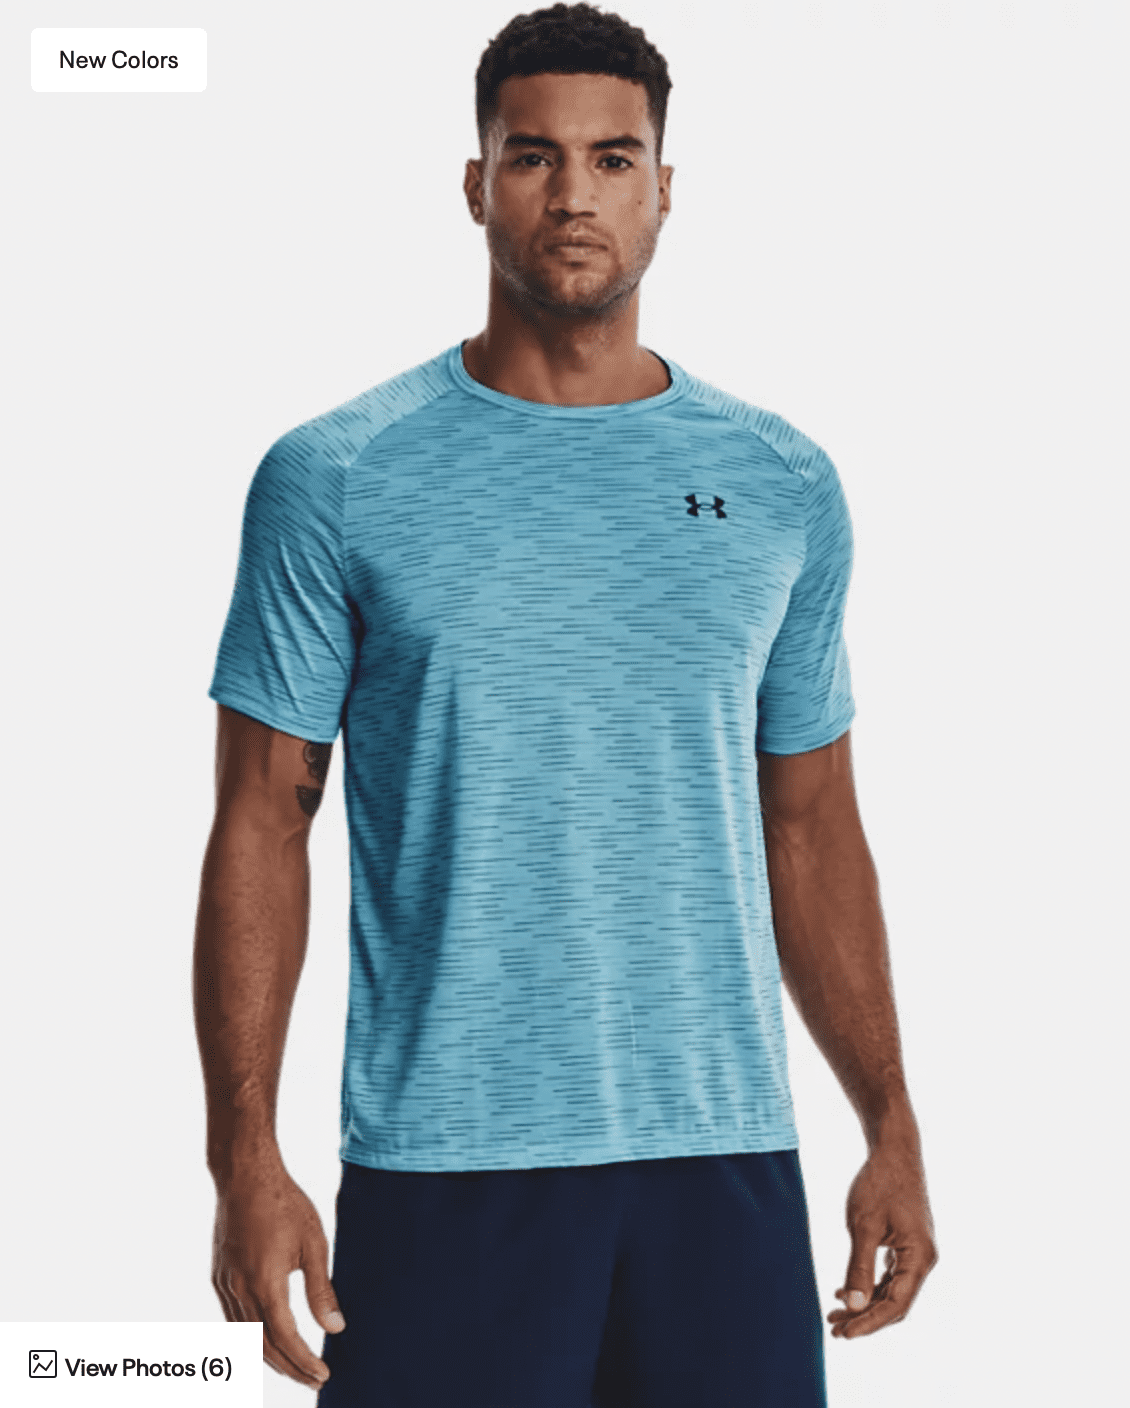 Under Armour: Select Men’s T-Shirt for 